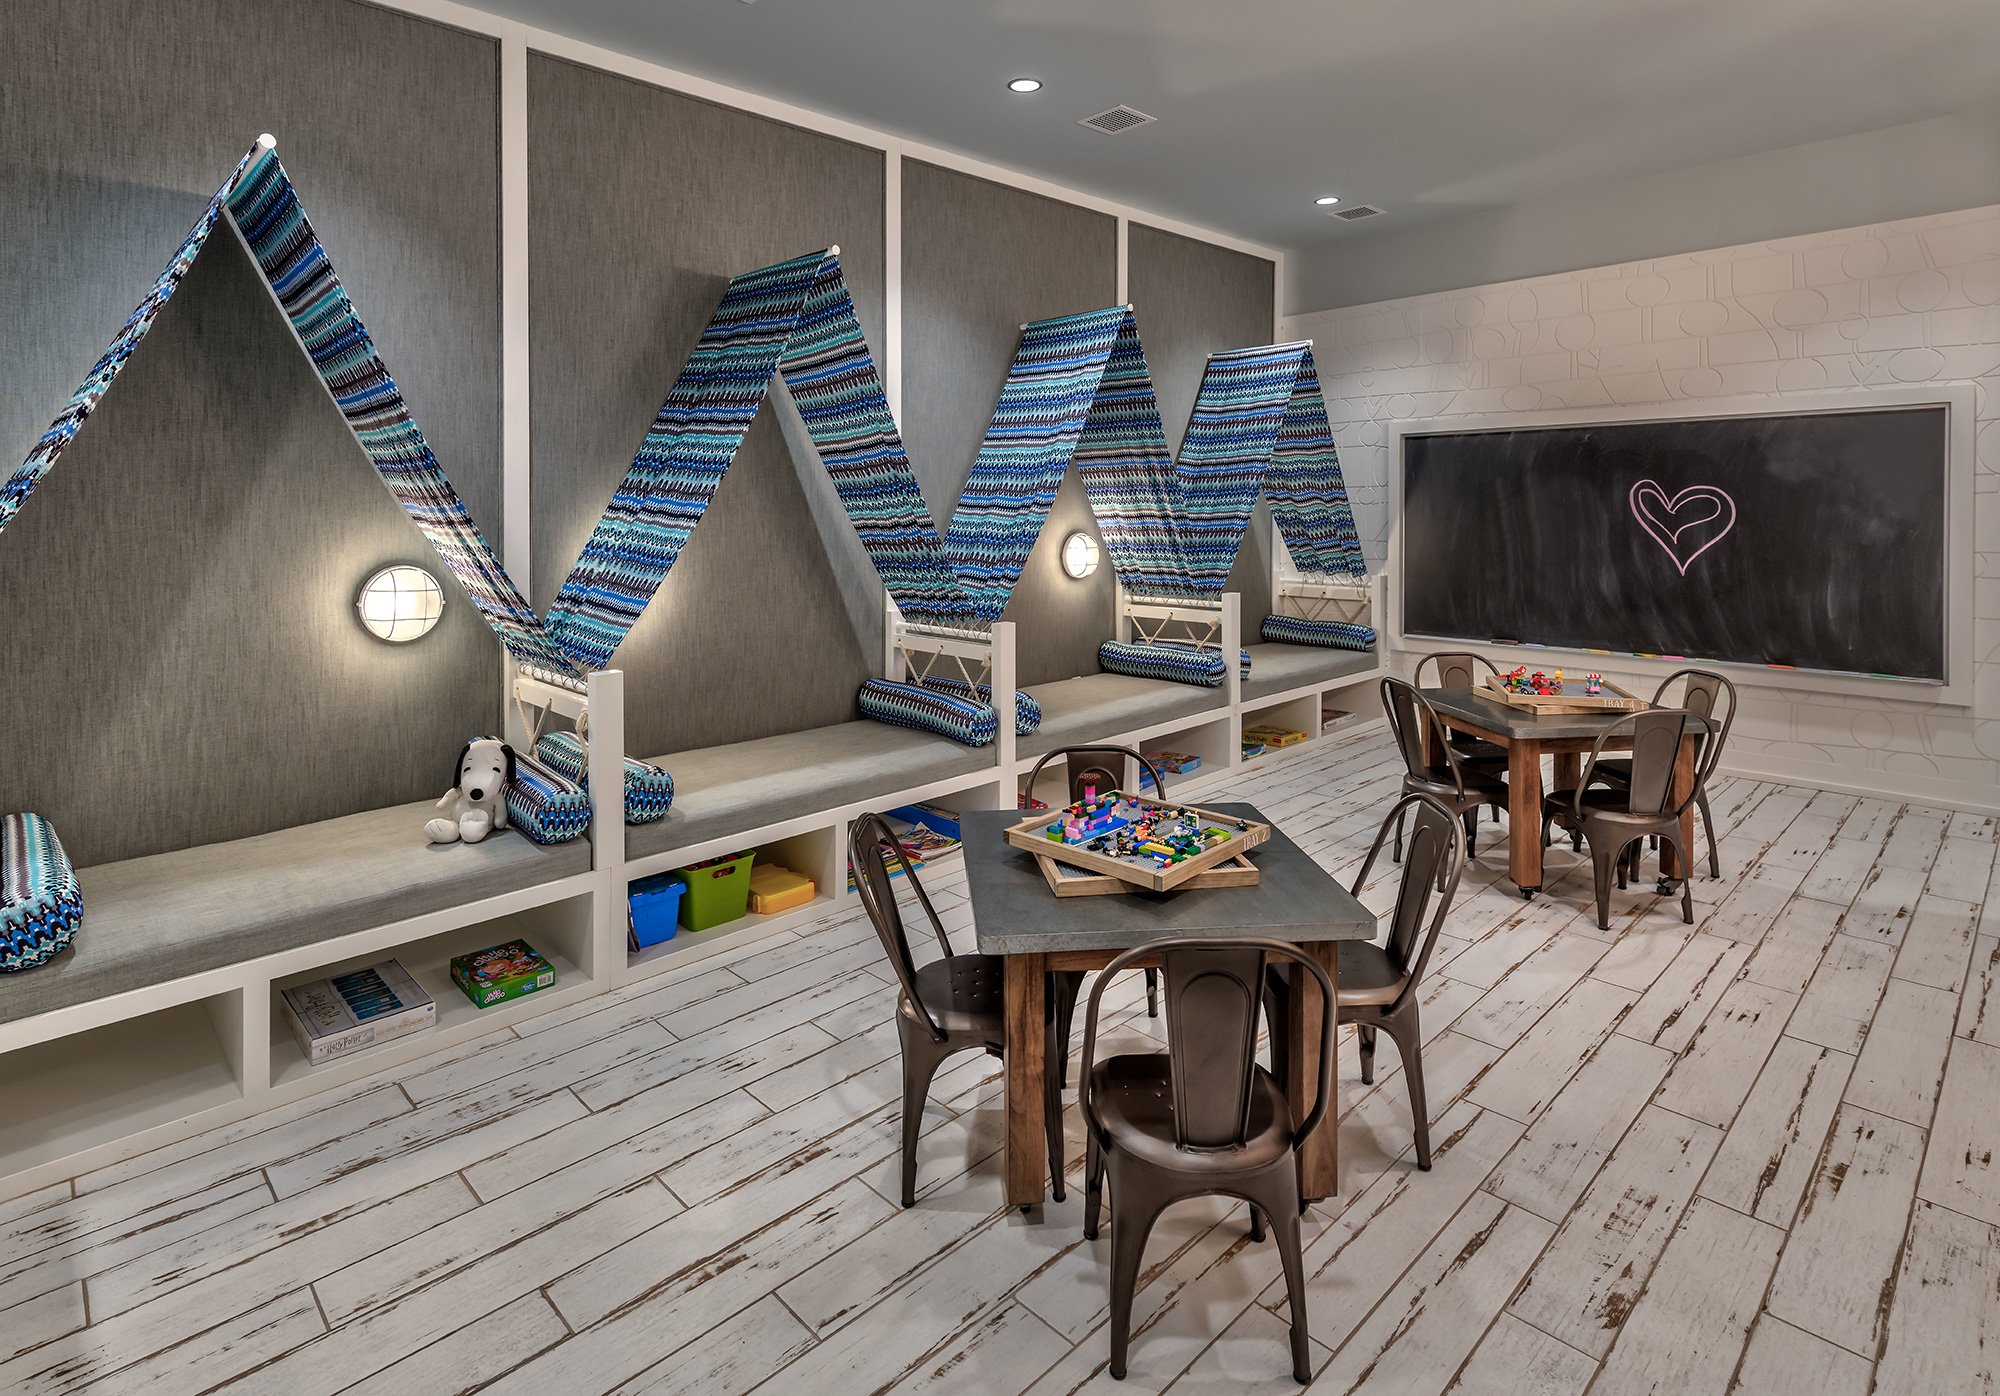   A lively playroom at Tahoe Beach Club is equipped with toys, games, and cheerful decor, providing a fun and engaging space for children. (Copy) (Copy)